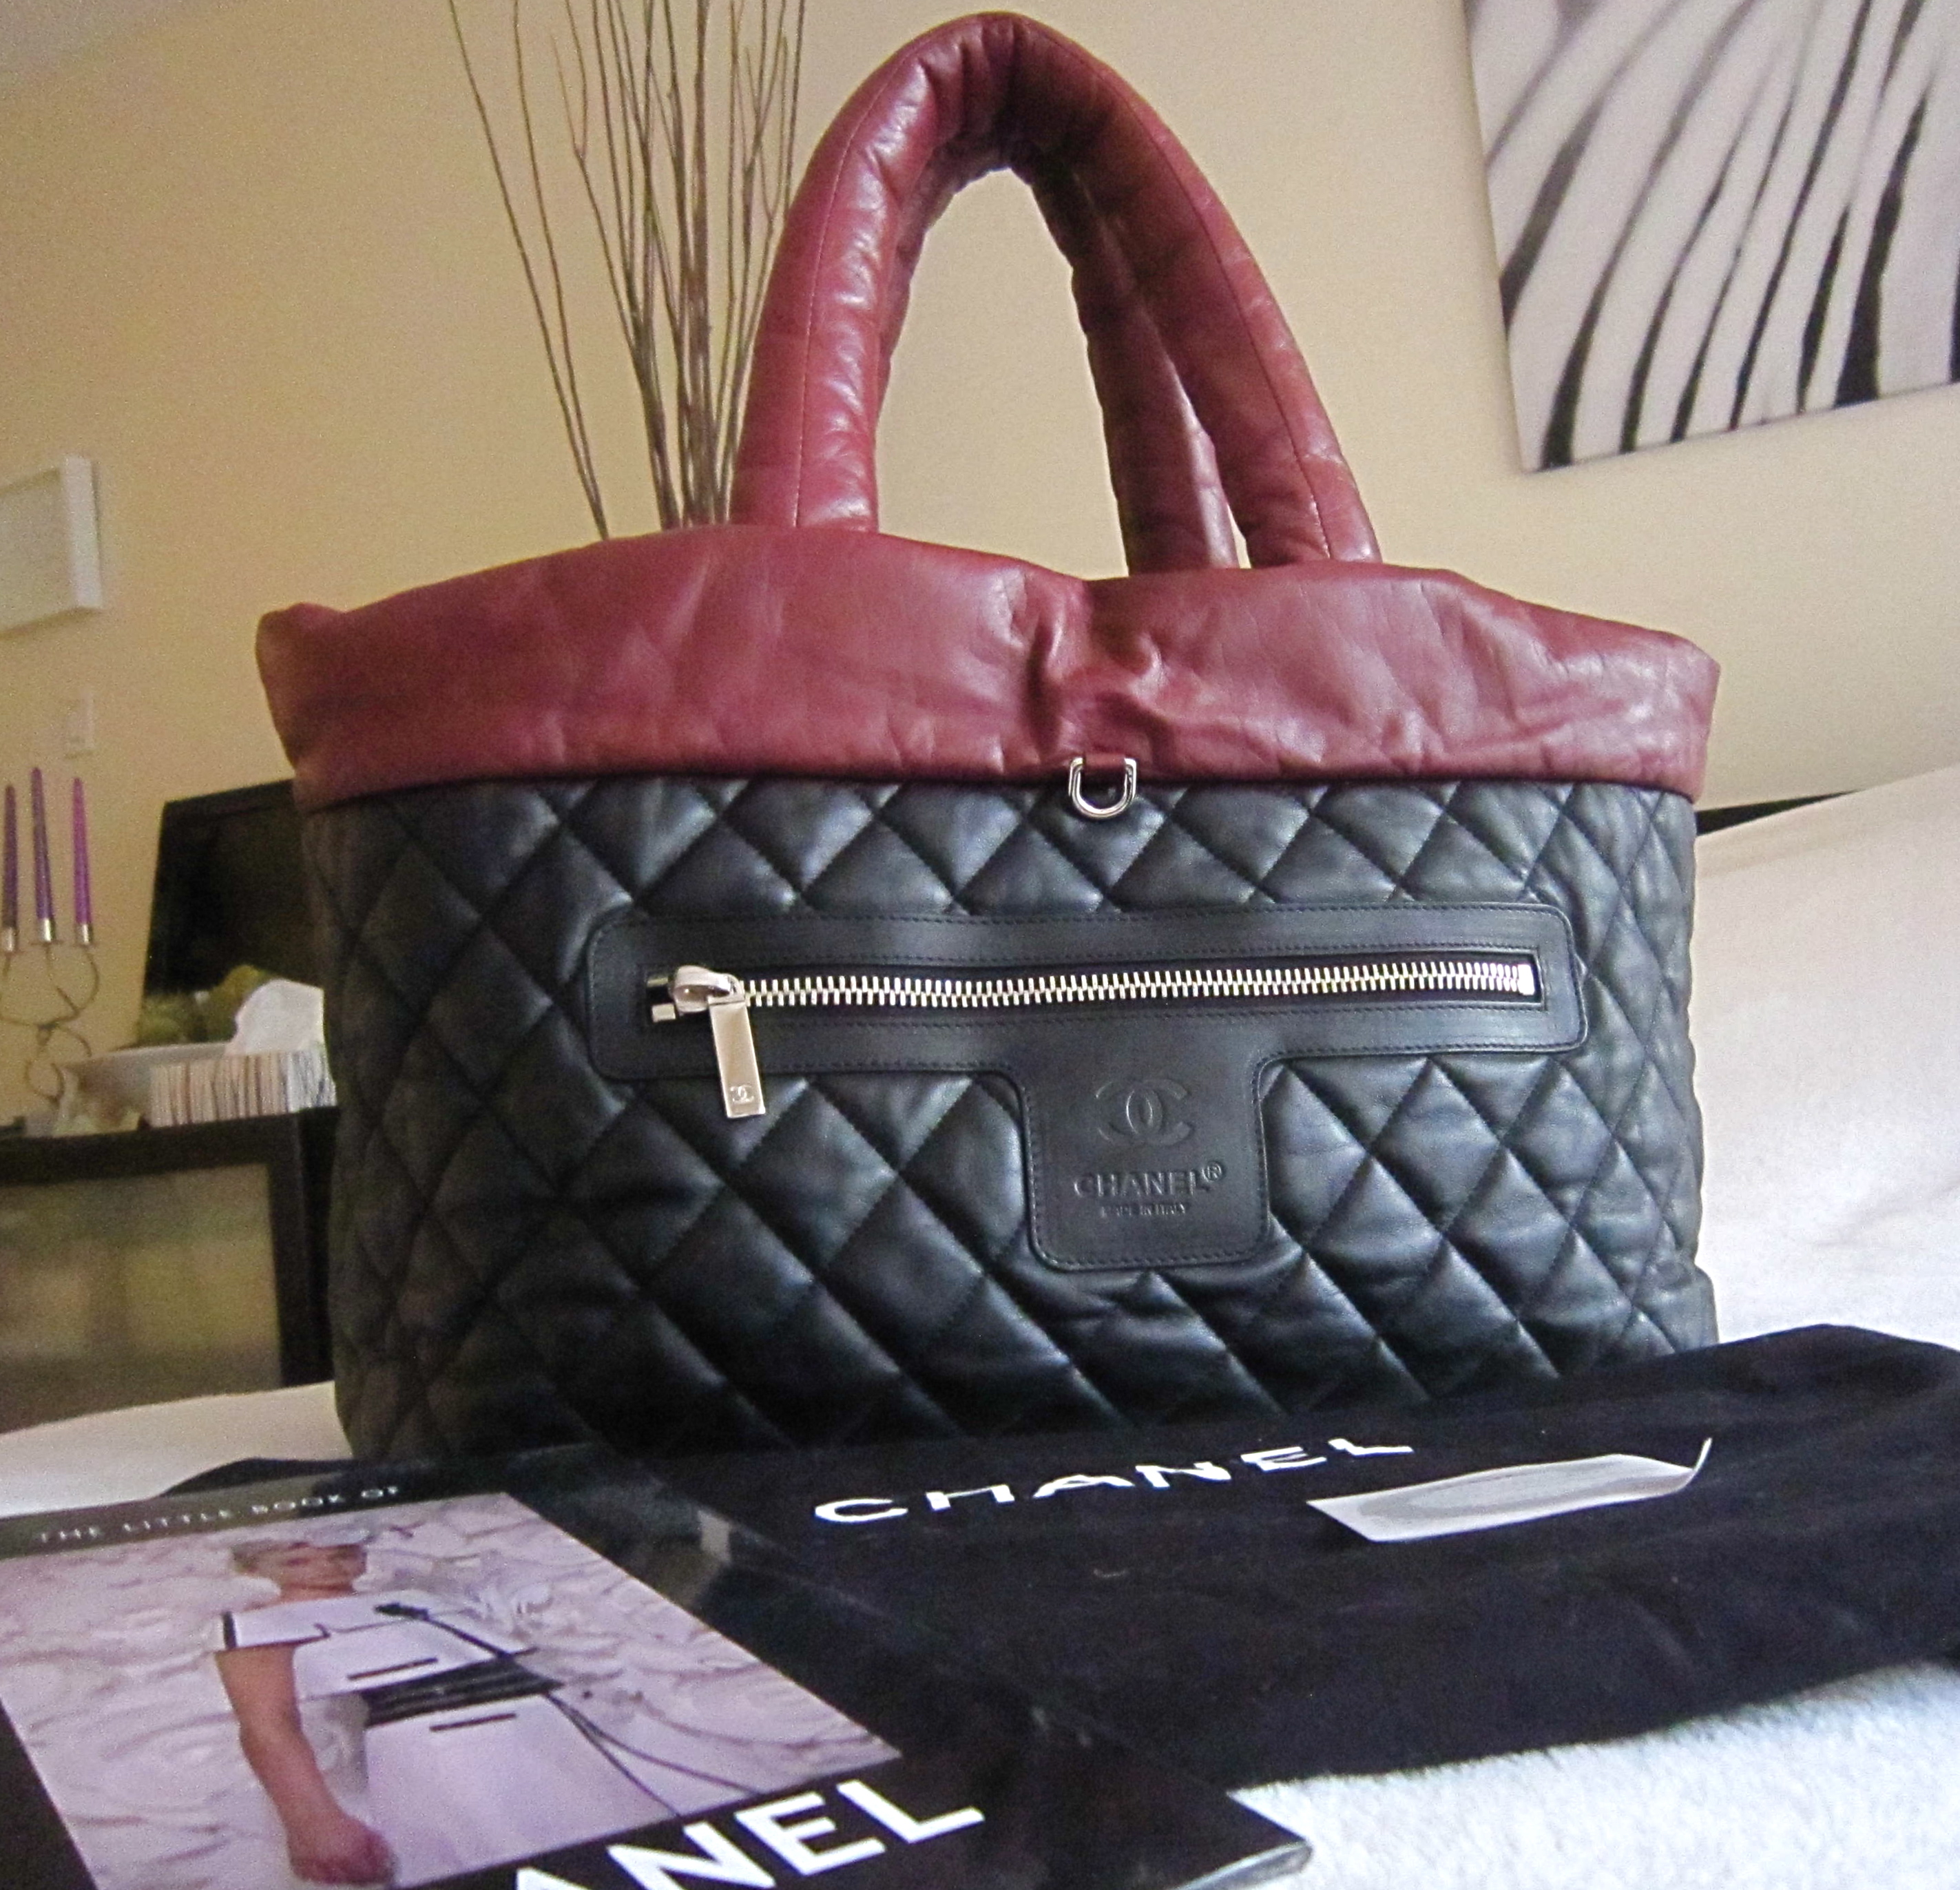 Chanel Coco Cocoon Black/Burgundy Lambskin Leather Reversible Large Tote Bag